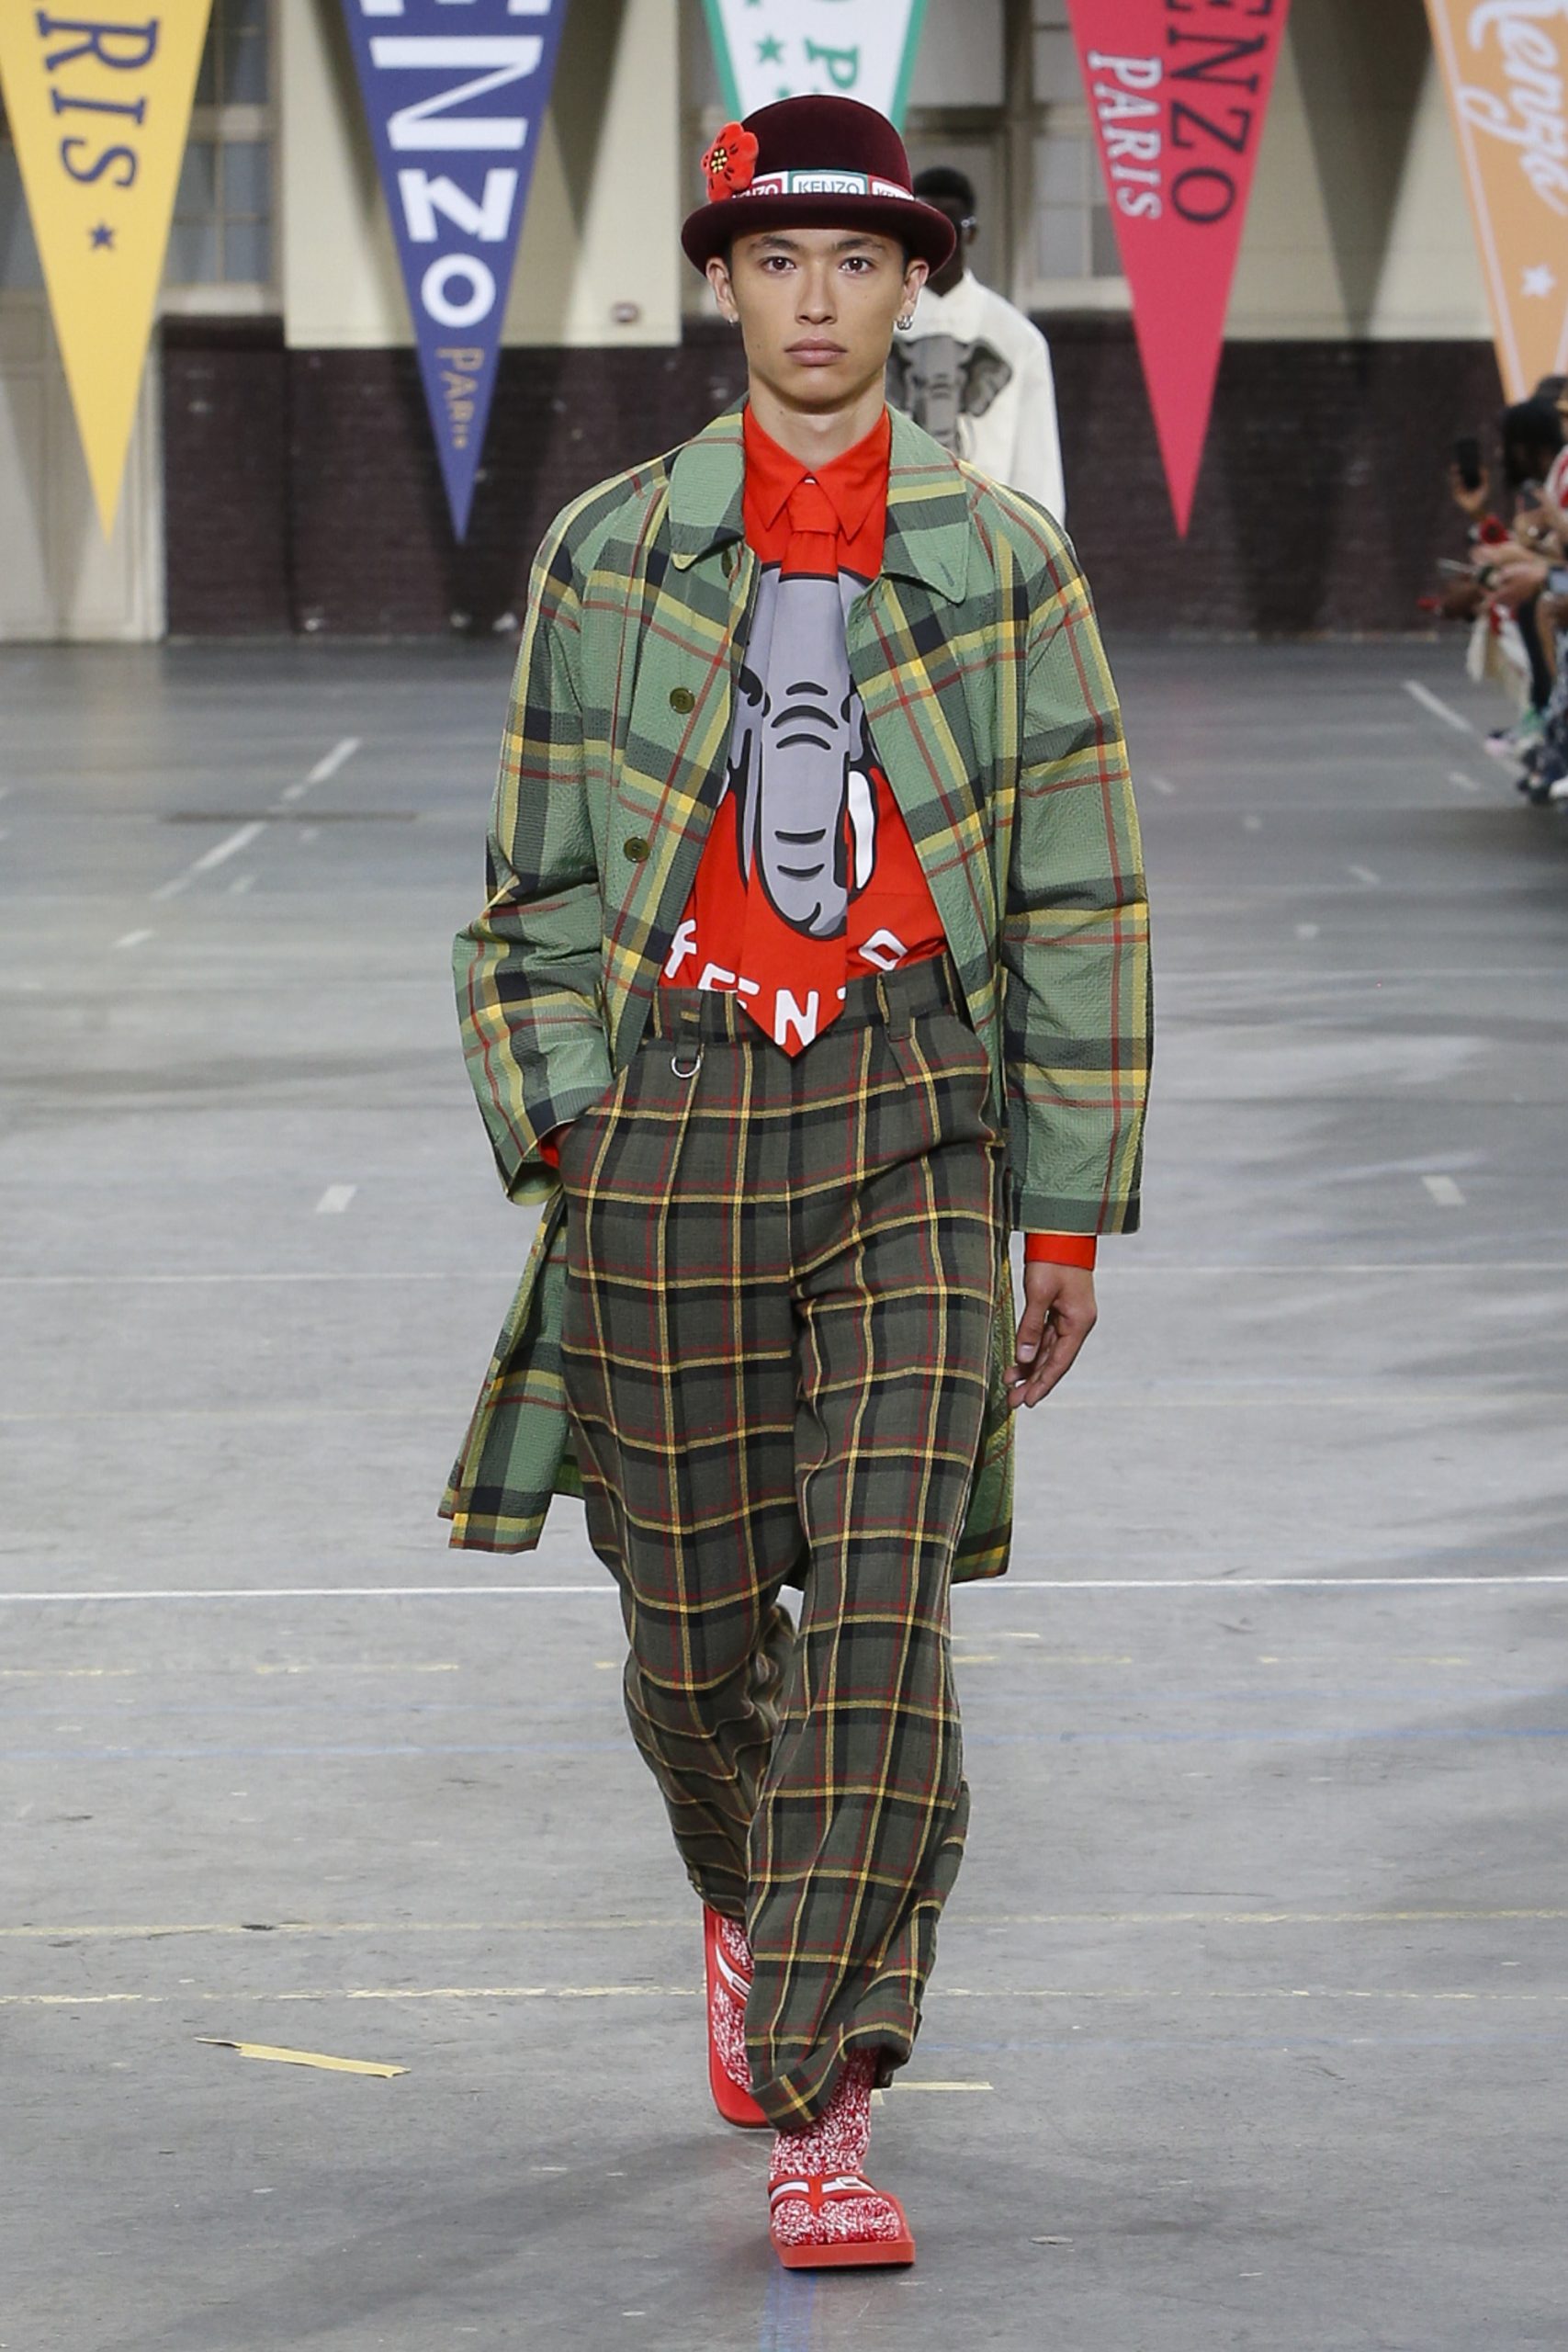 Kenzo’s artistic director NIGO has built on his previous collection as he sets the bar for the fashion house.